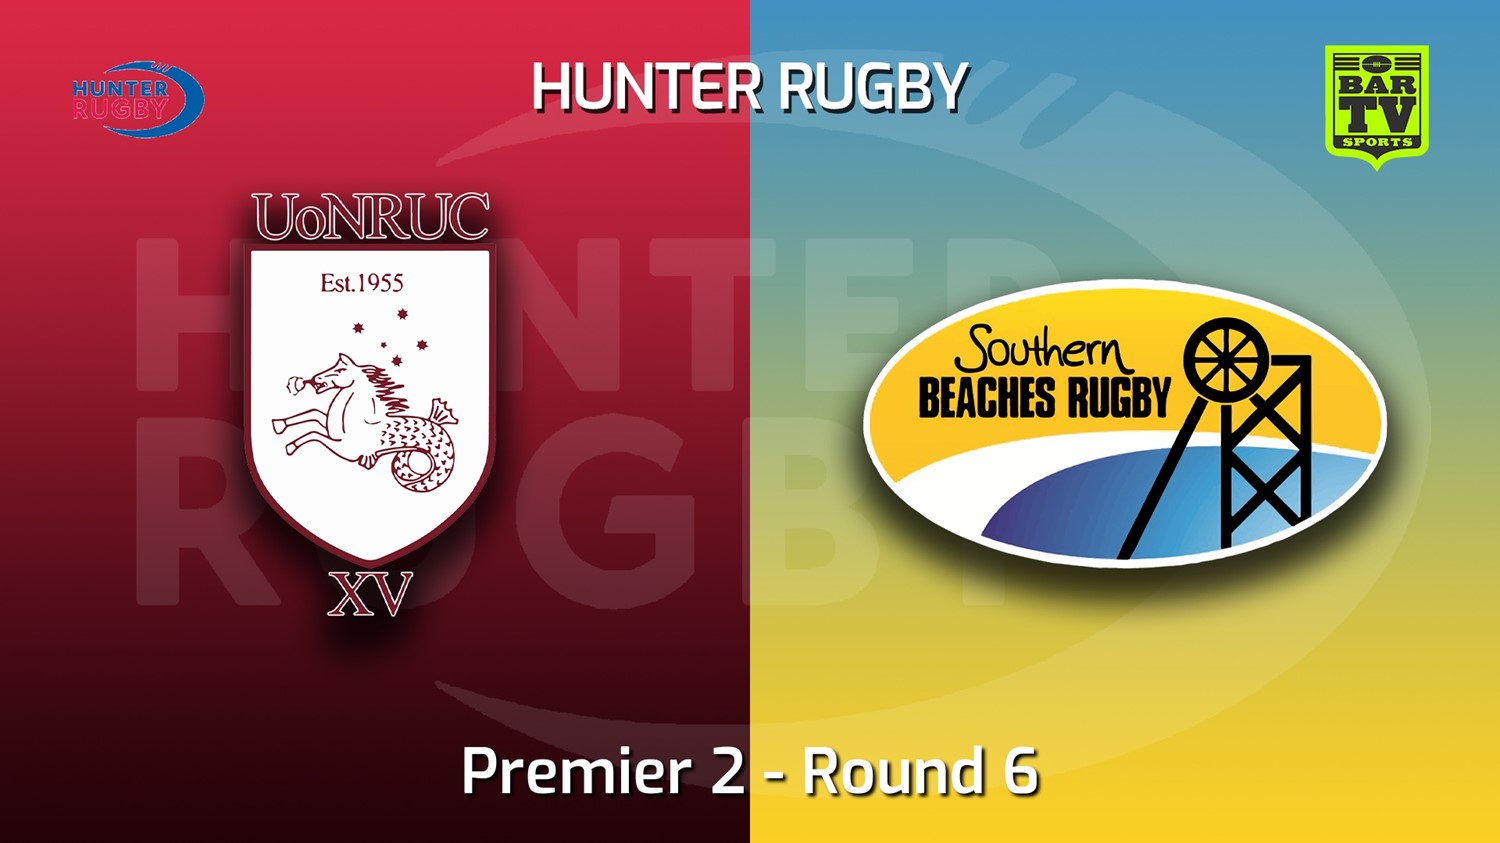 220528-Hunter Rugby Round 6 - Premier 2 - University Of Newcastle v Southern Beaches Slate Image